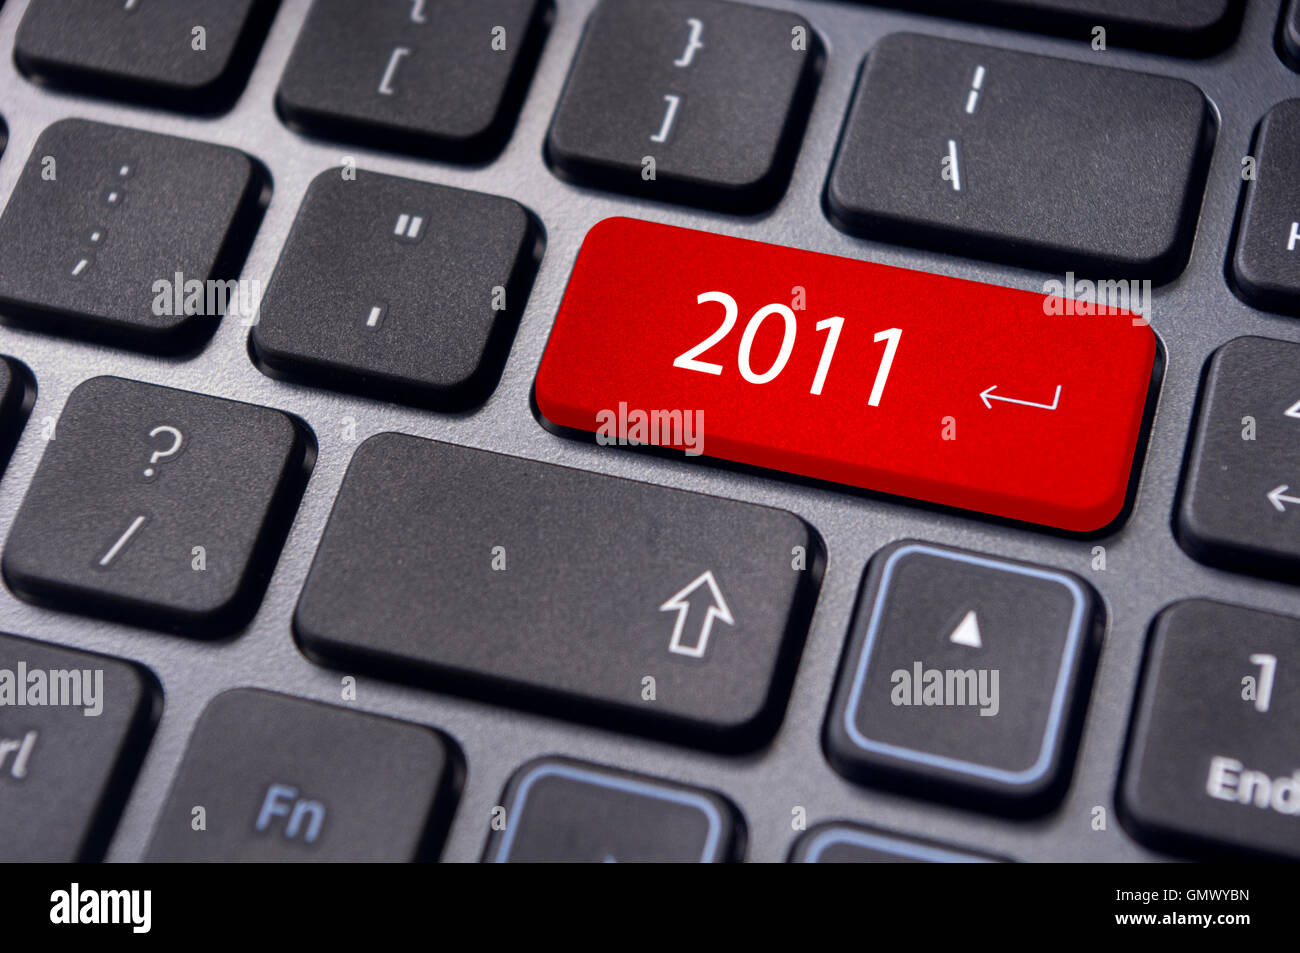 new year 2011, keyboard concepts Stock Photo